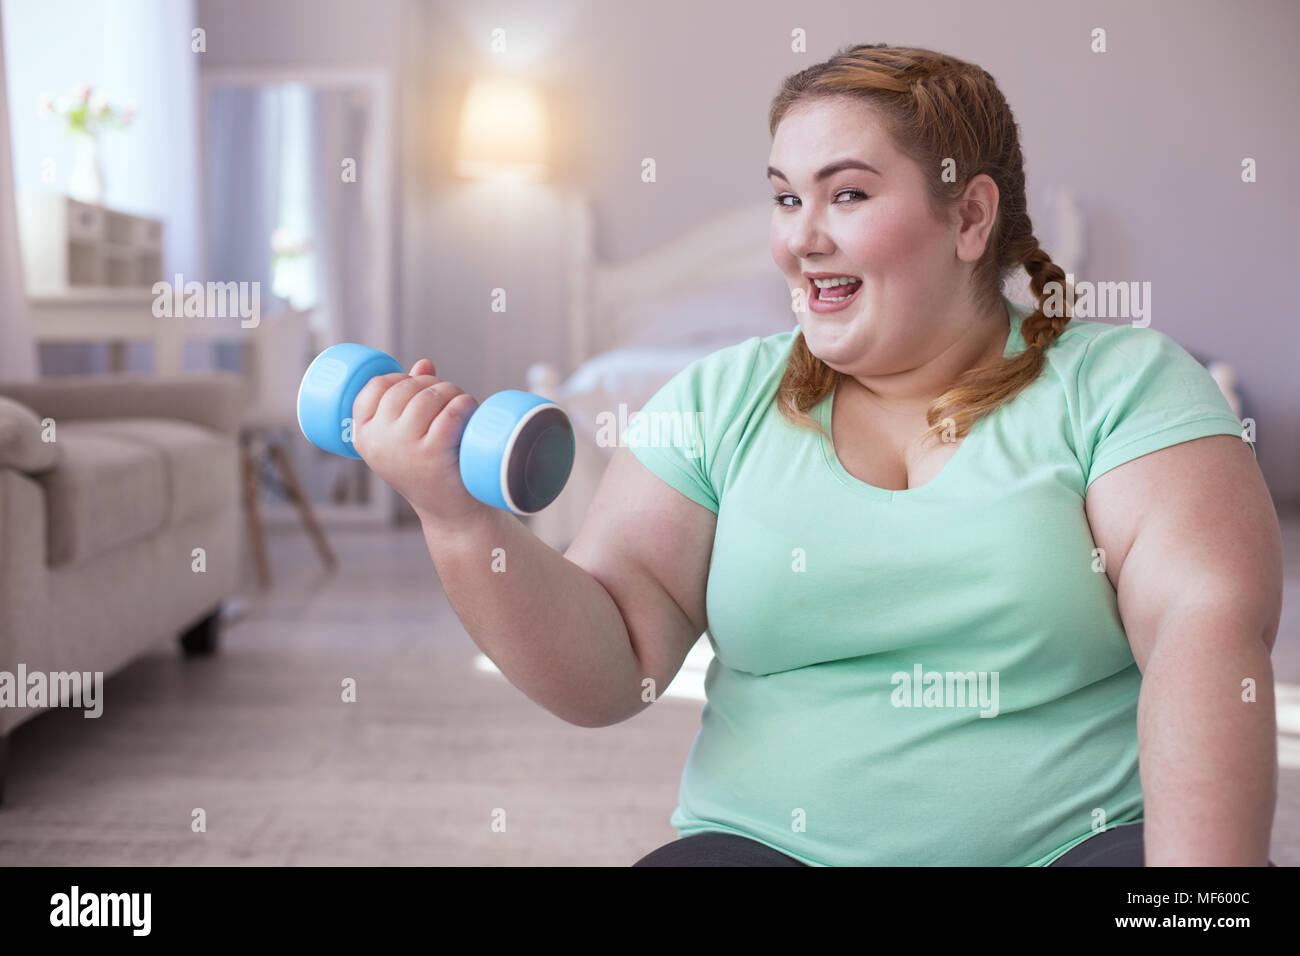 Amused young woman exercising with dumbbells Stock Photo